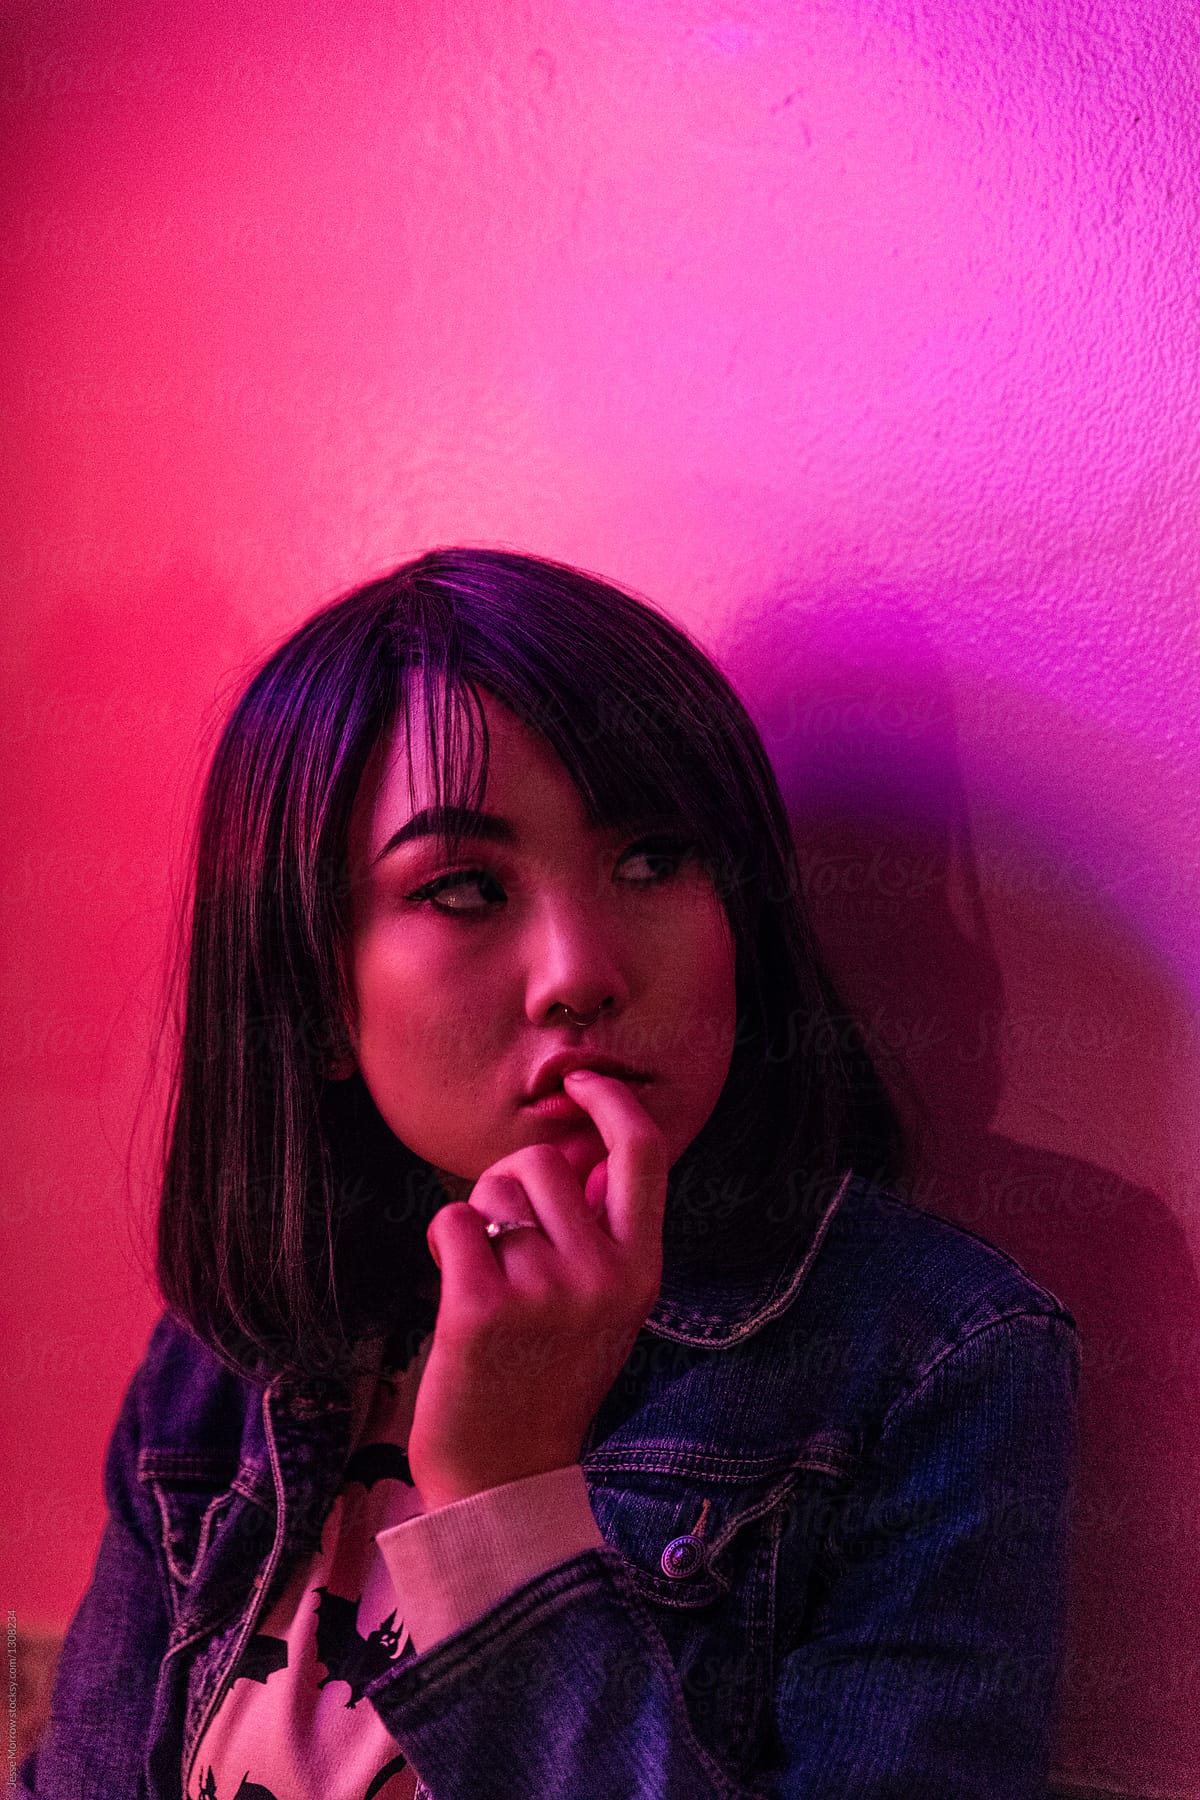 Portrait Of Young Asian Female Woman In Pink Room With Neon Lights By